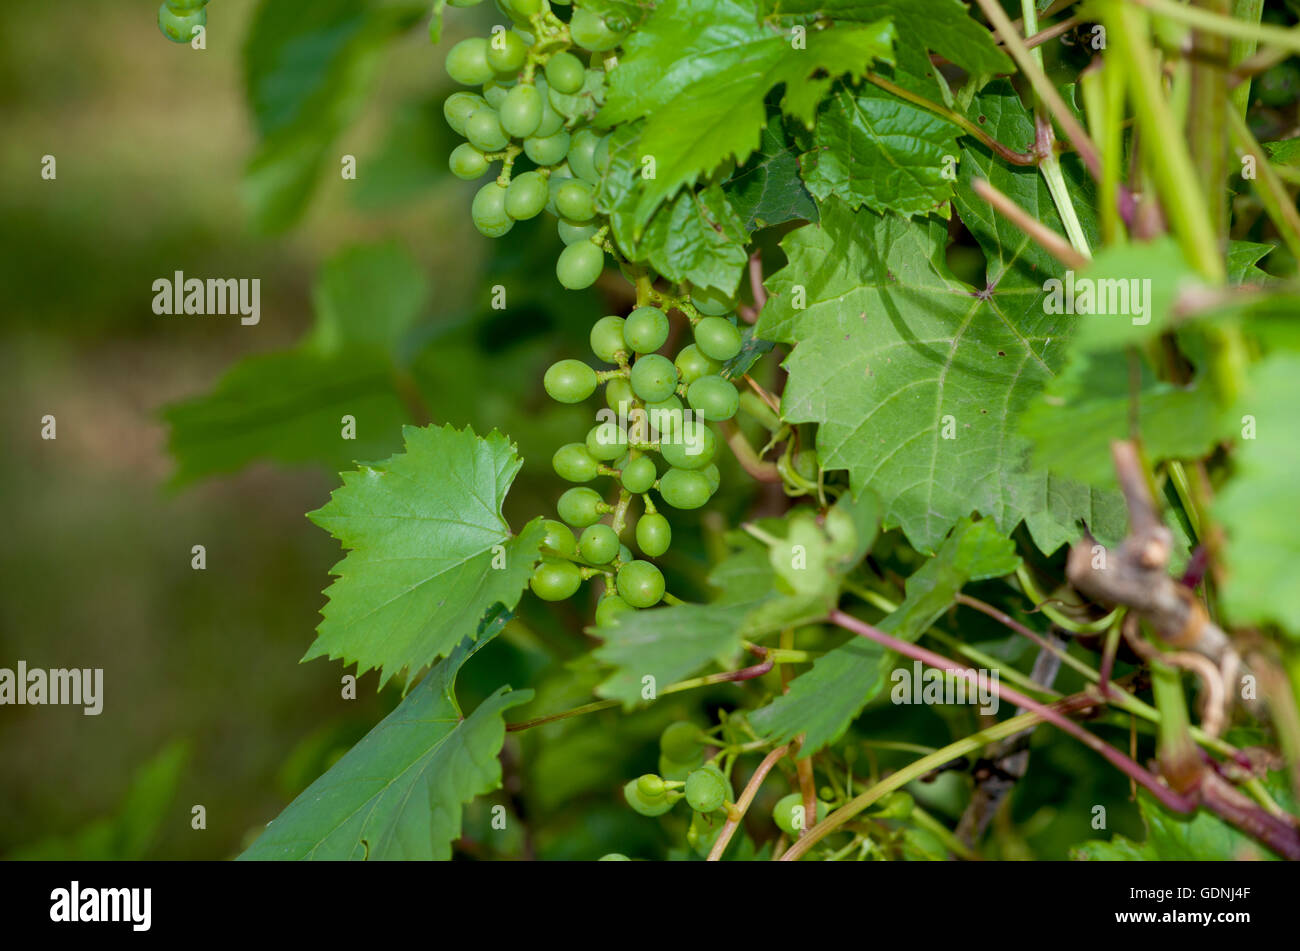 Grapes green on a bush unripe,a bush, a garden, berry, food, gardening, grapes, green, leaves, on a branch Stock Photo